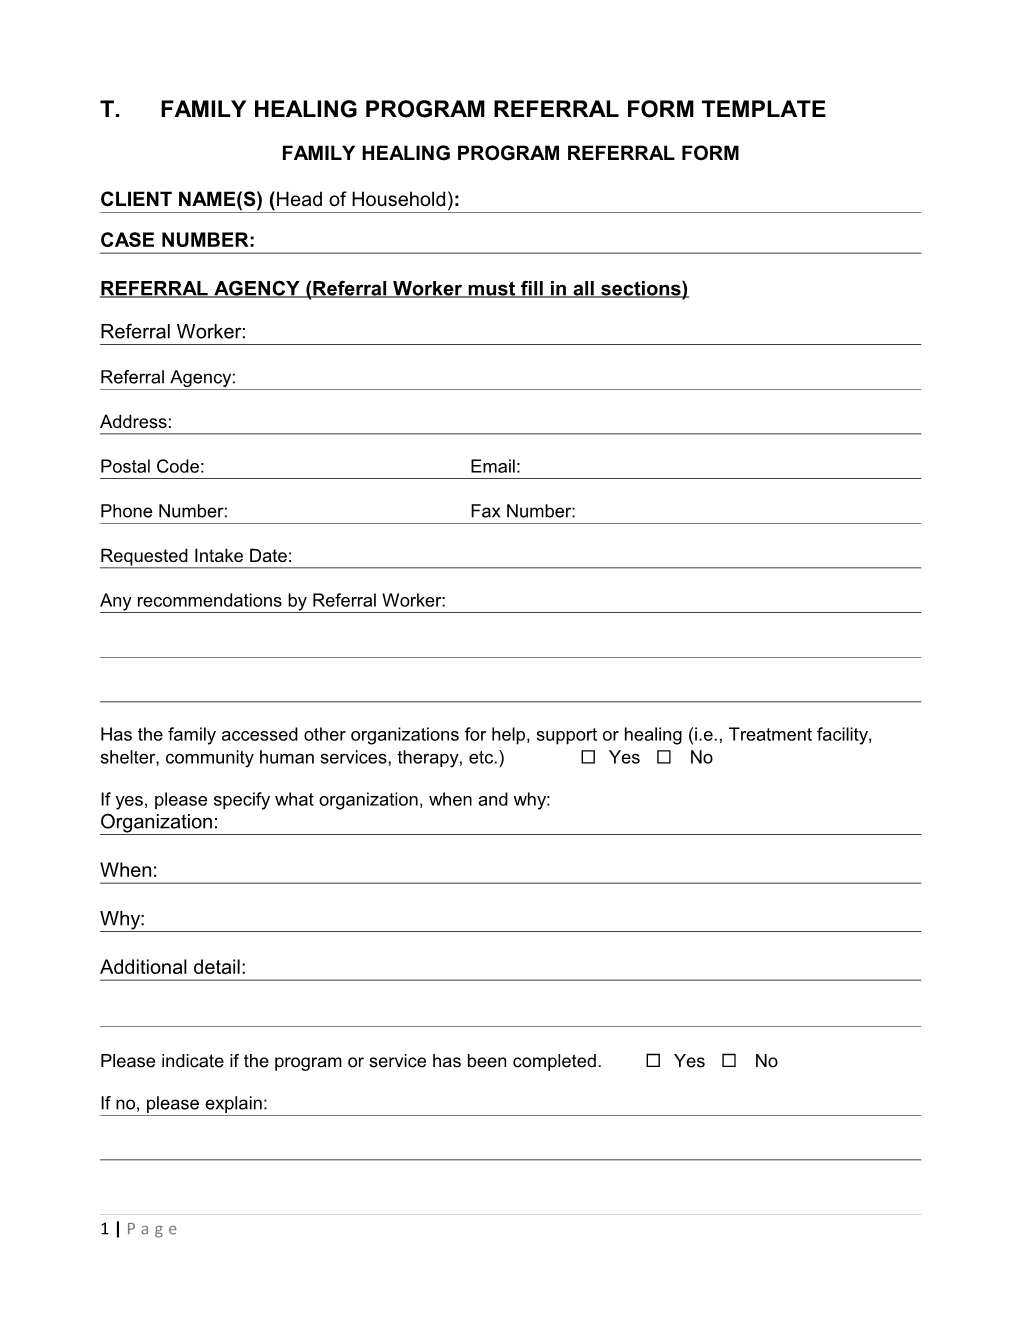 T. Family Healing Program Referral Form Template